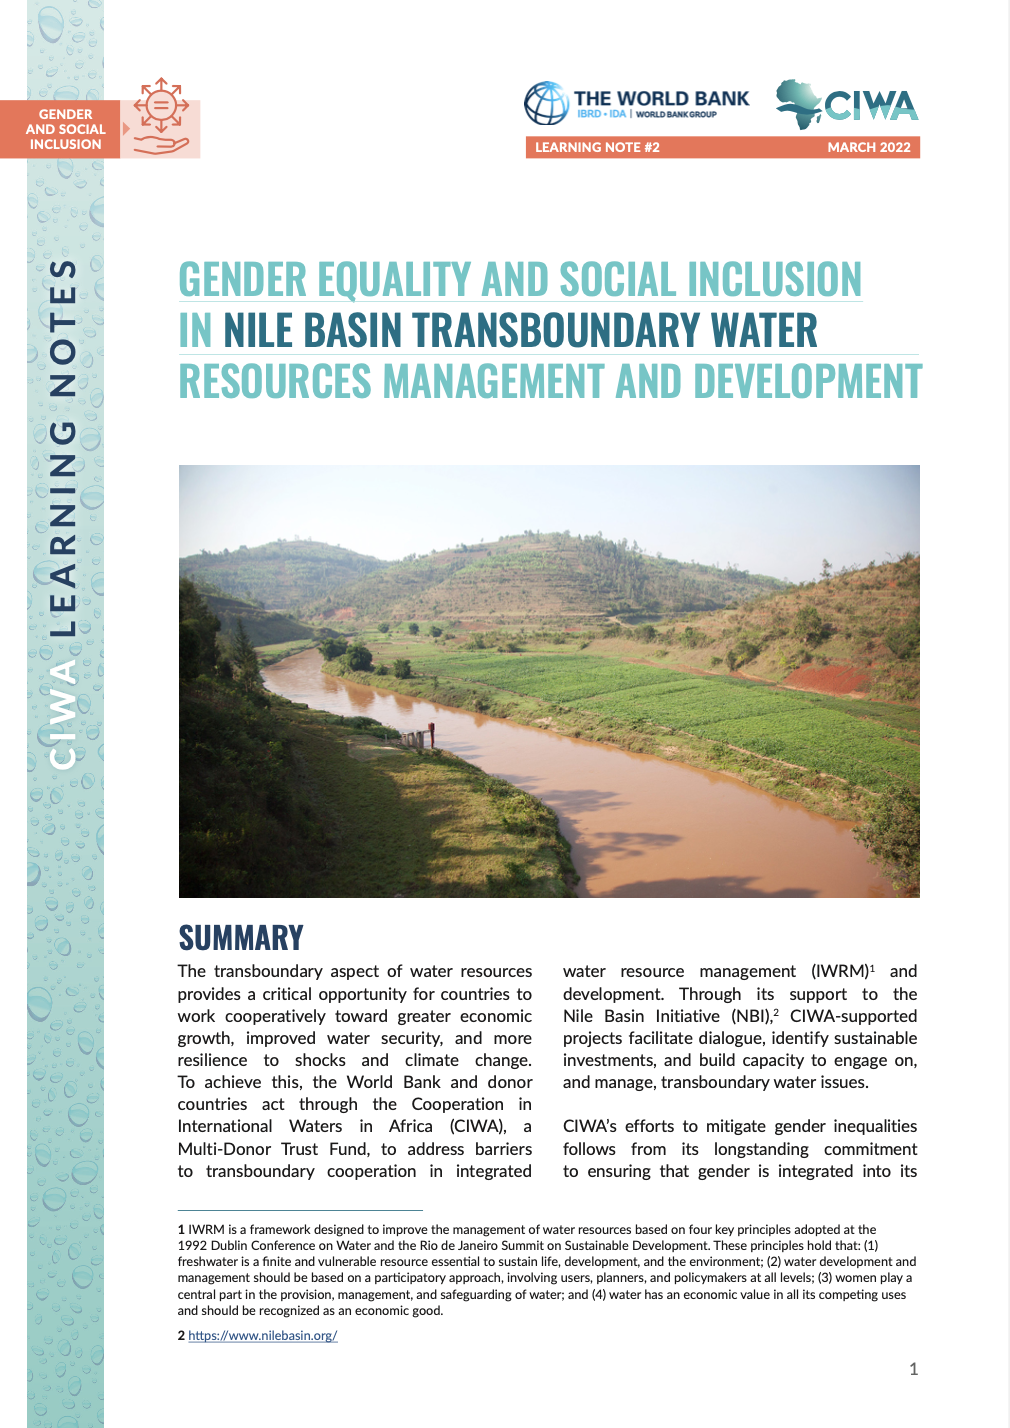 Gender Equality and Social Inclusion in Nile Basin Transboundary Water Resources Management and Development